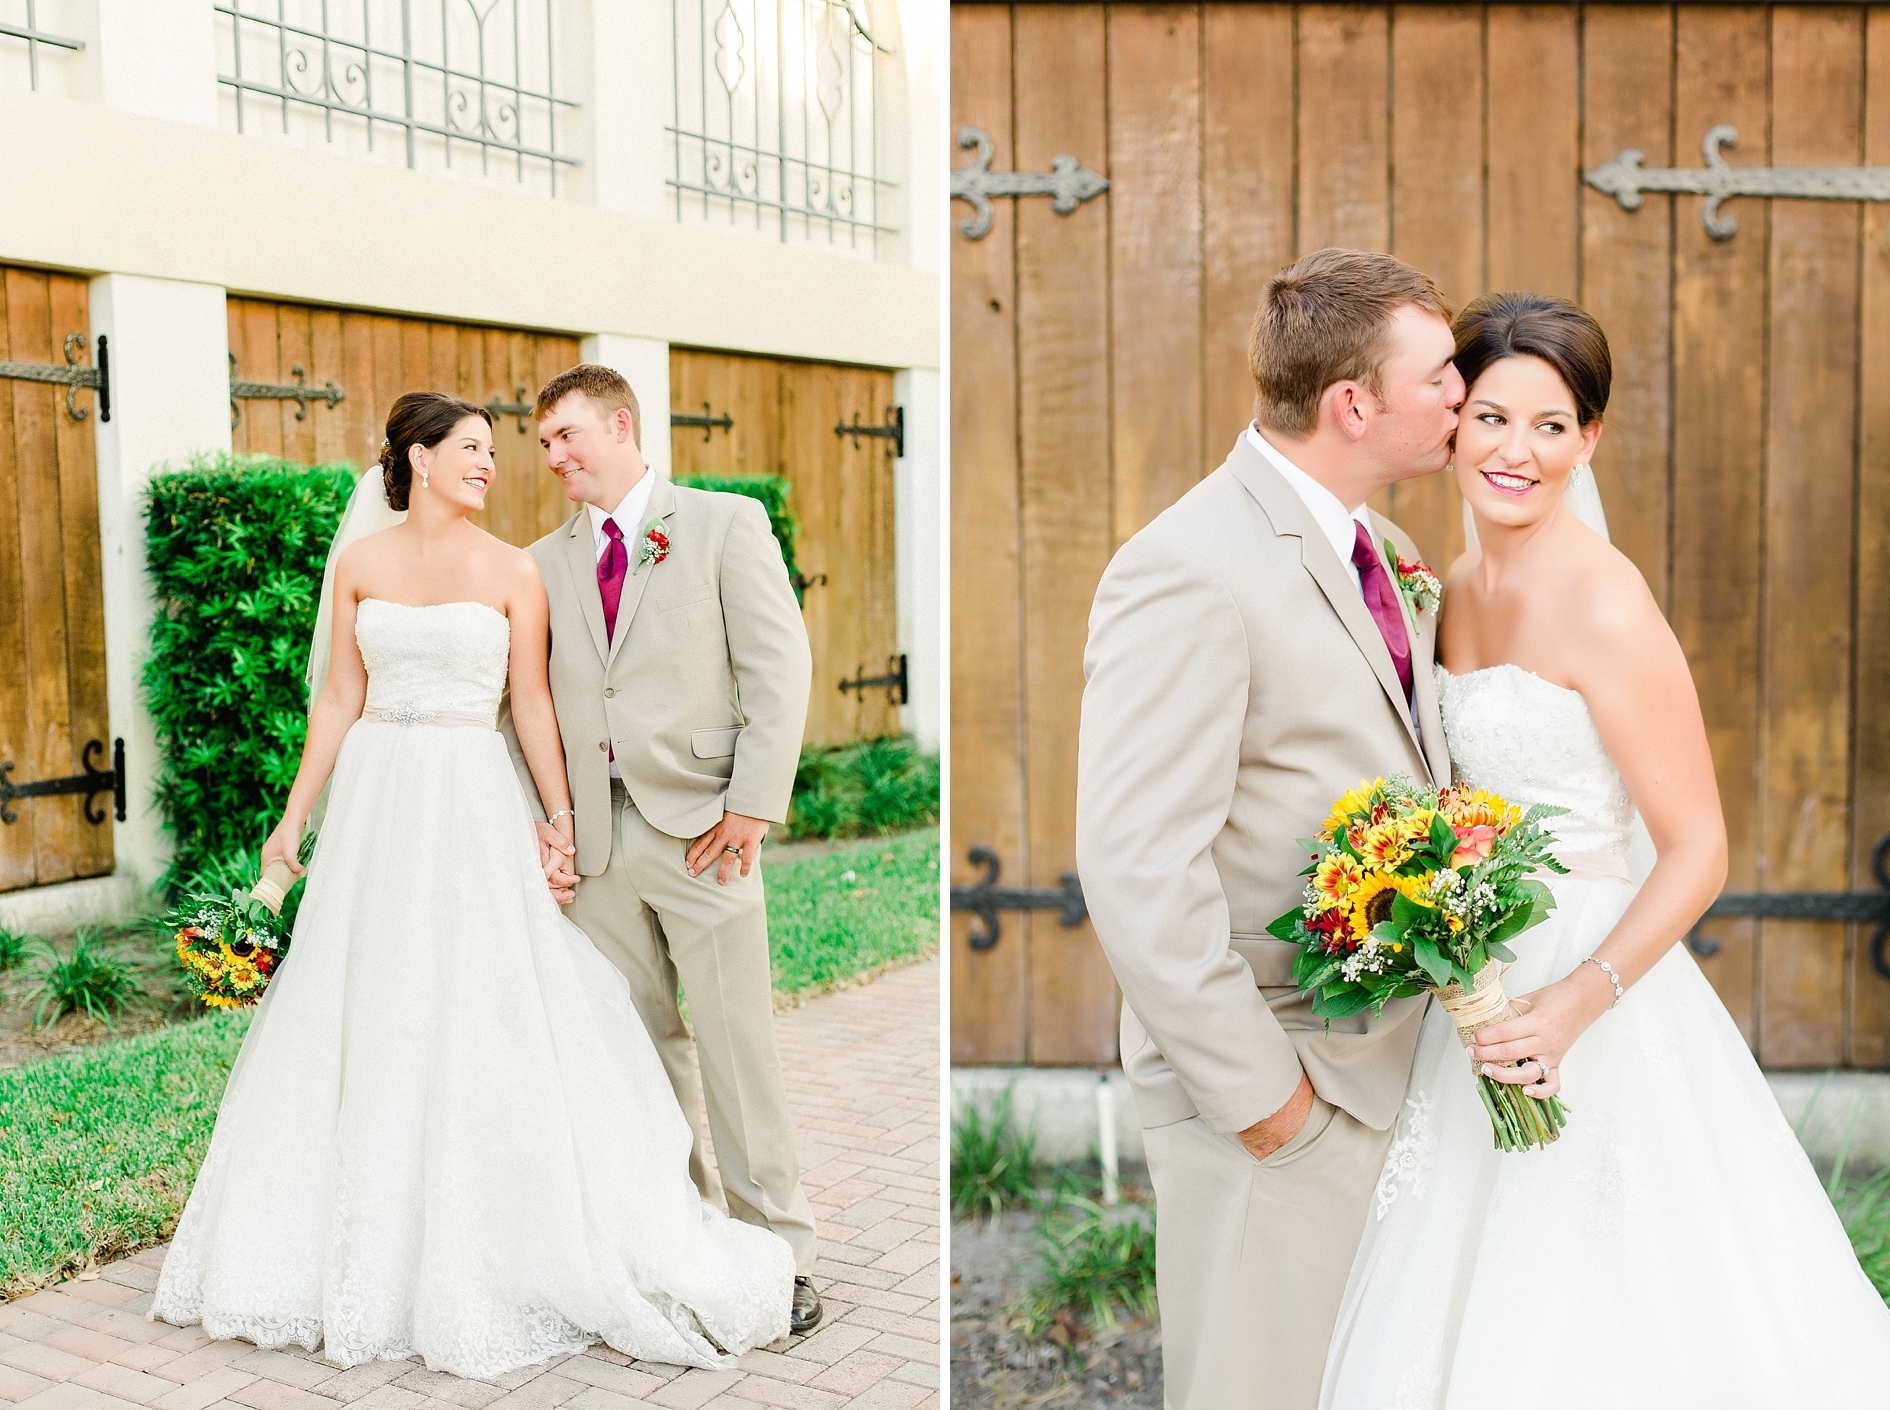 South Florida Museum Wedding | © Ailyn La Torre Photography 2015